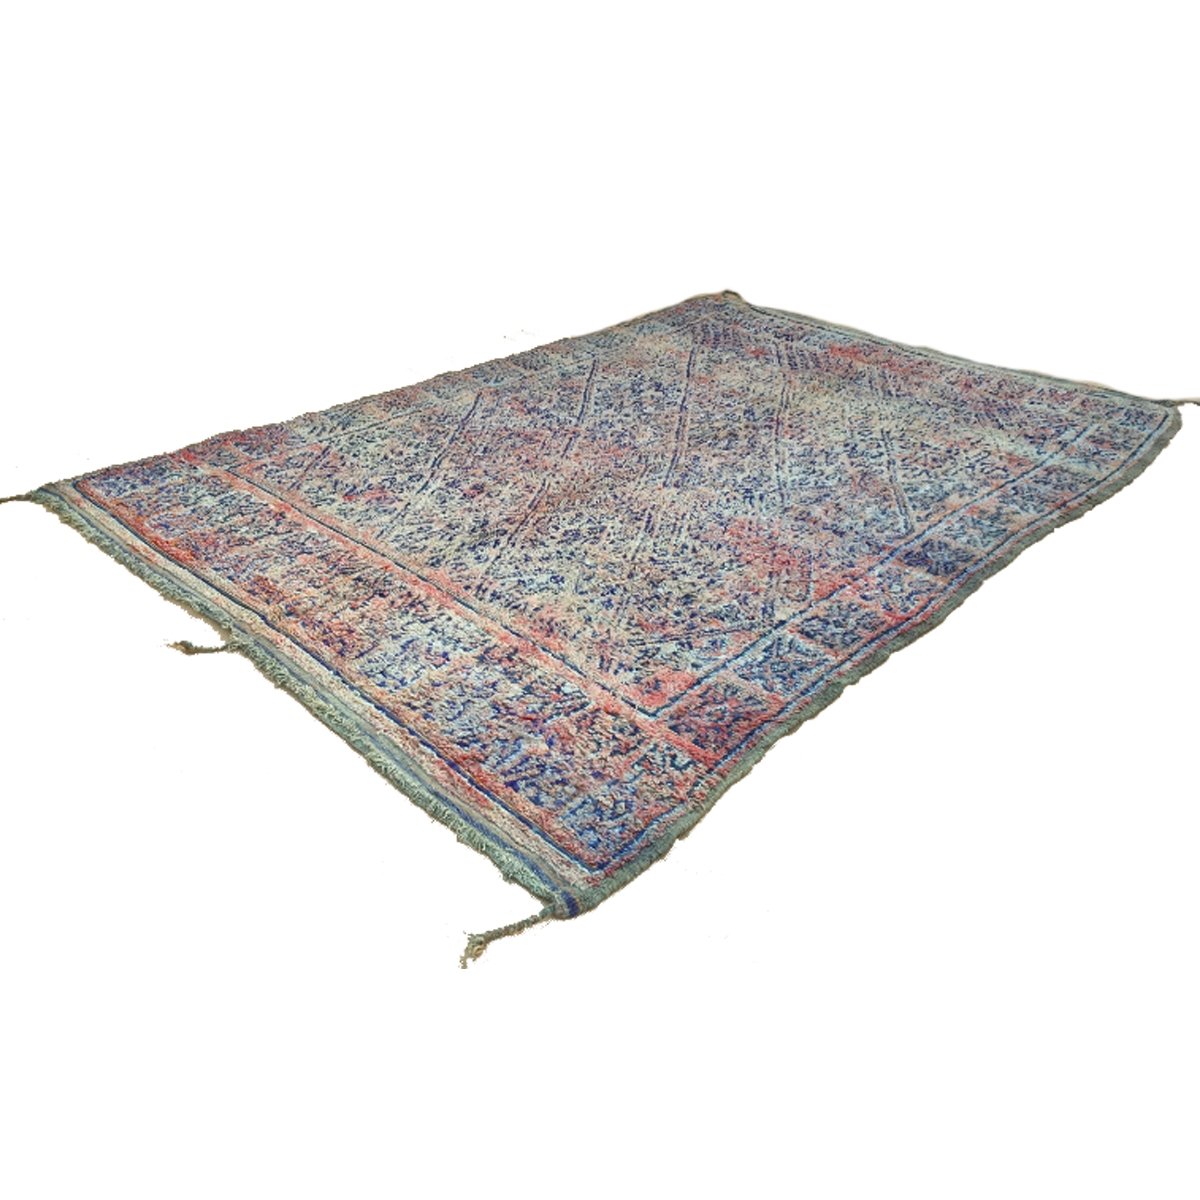 RUGS FOR SALE ONLINE